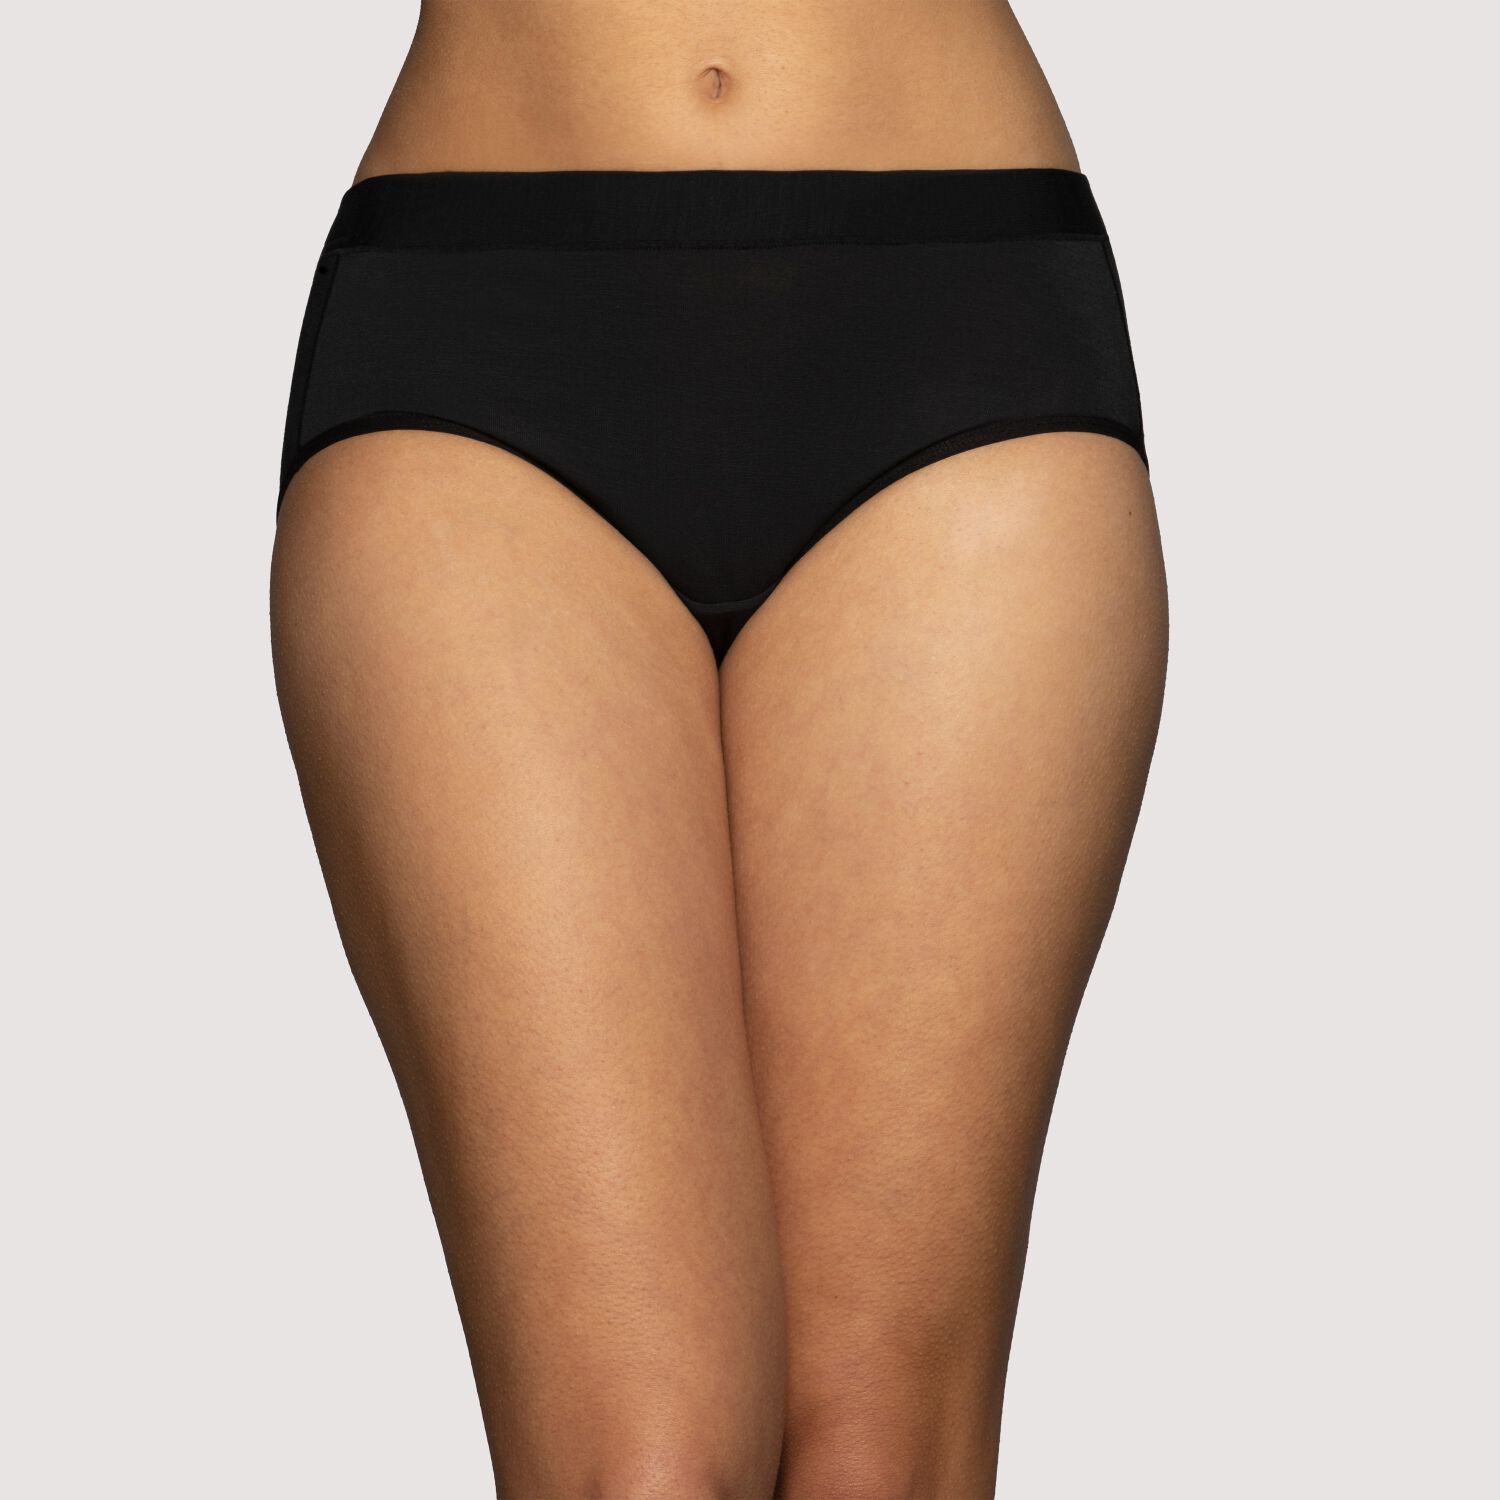 Women's Variety 2 Pack Cheeky Underwear and 50 similar items